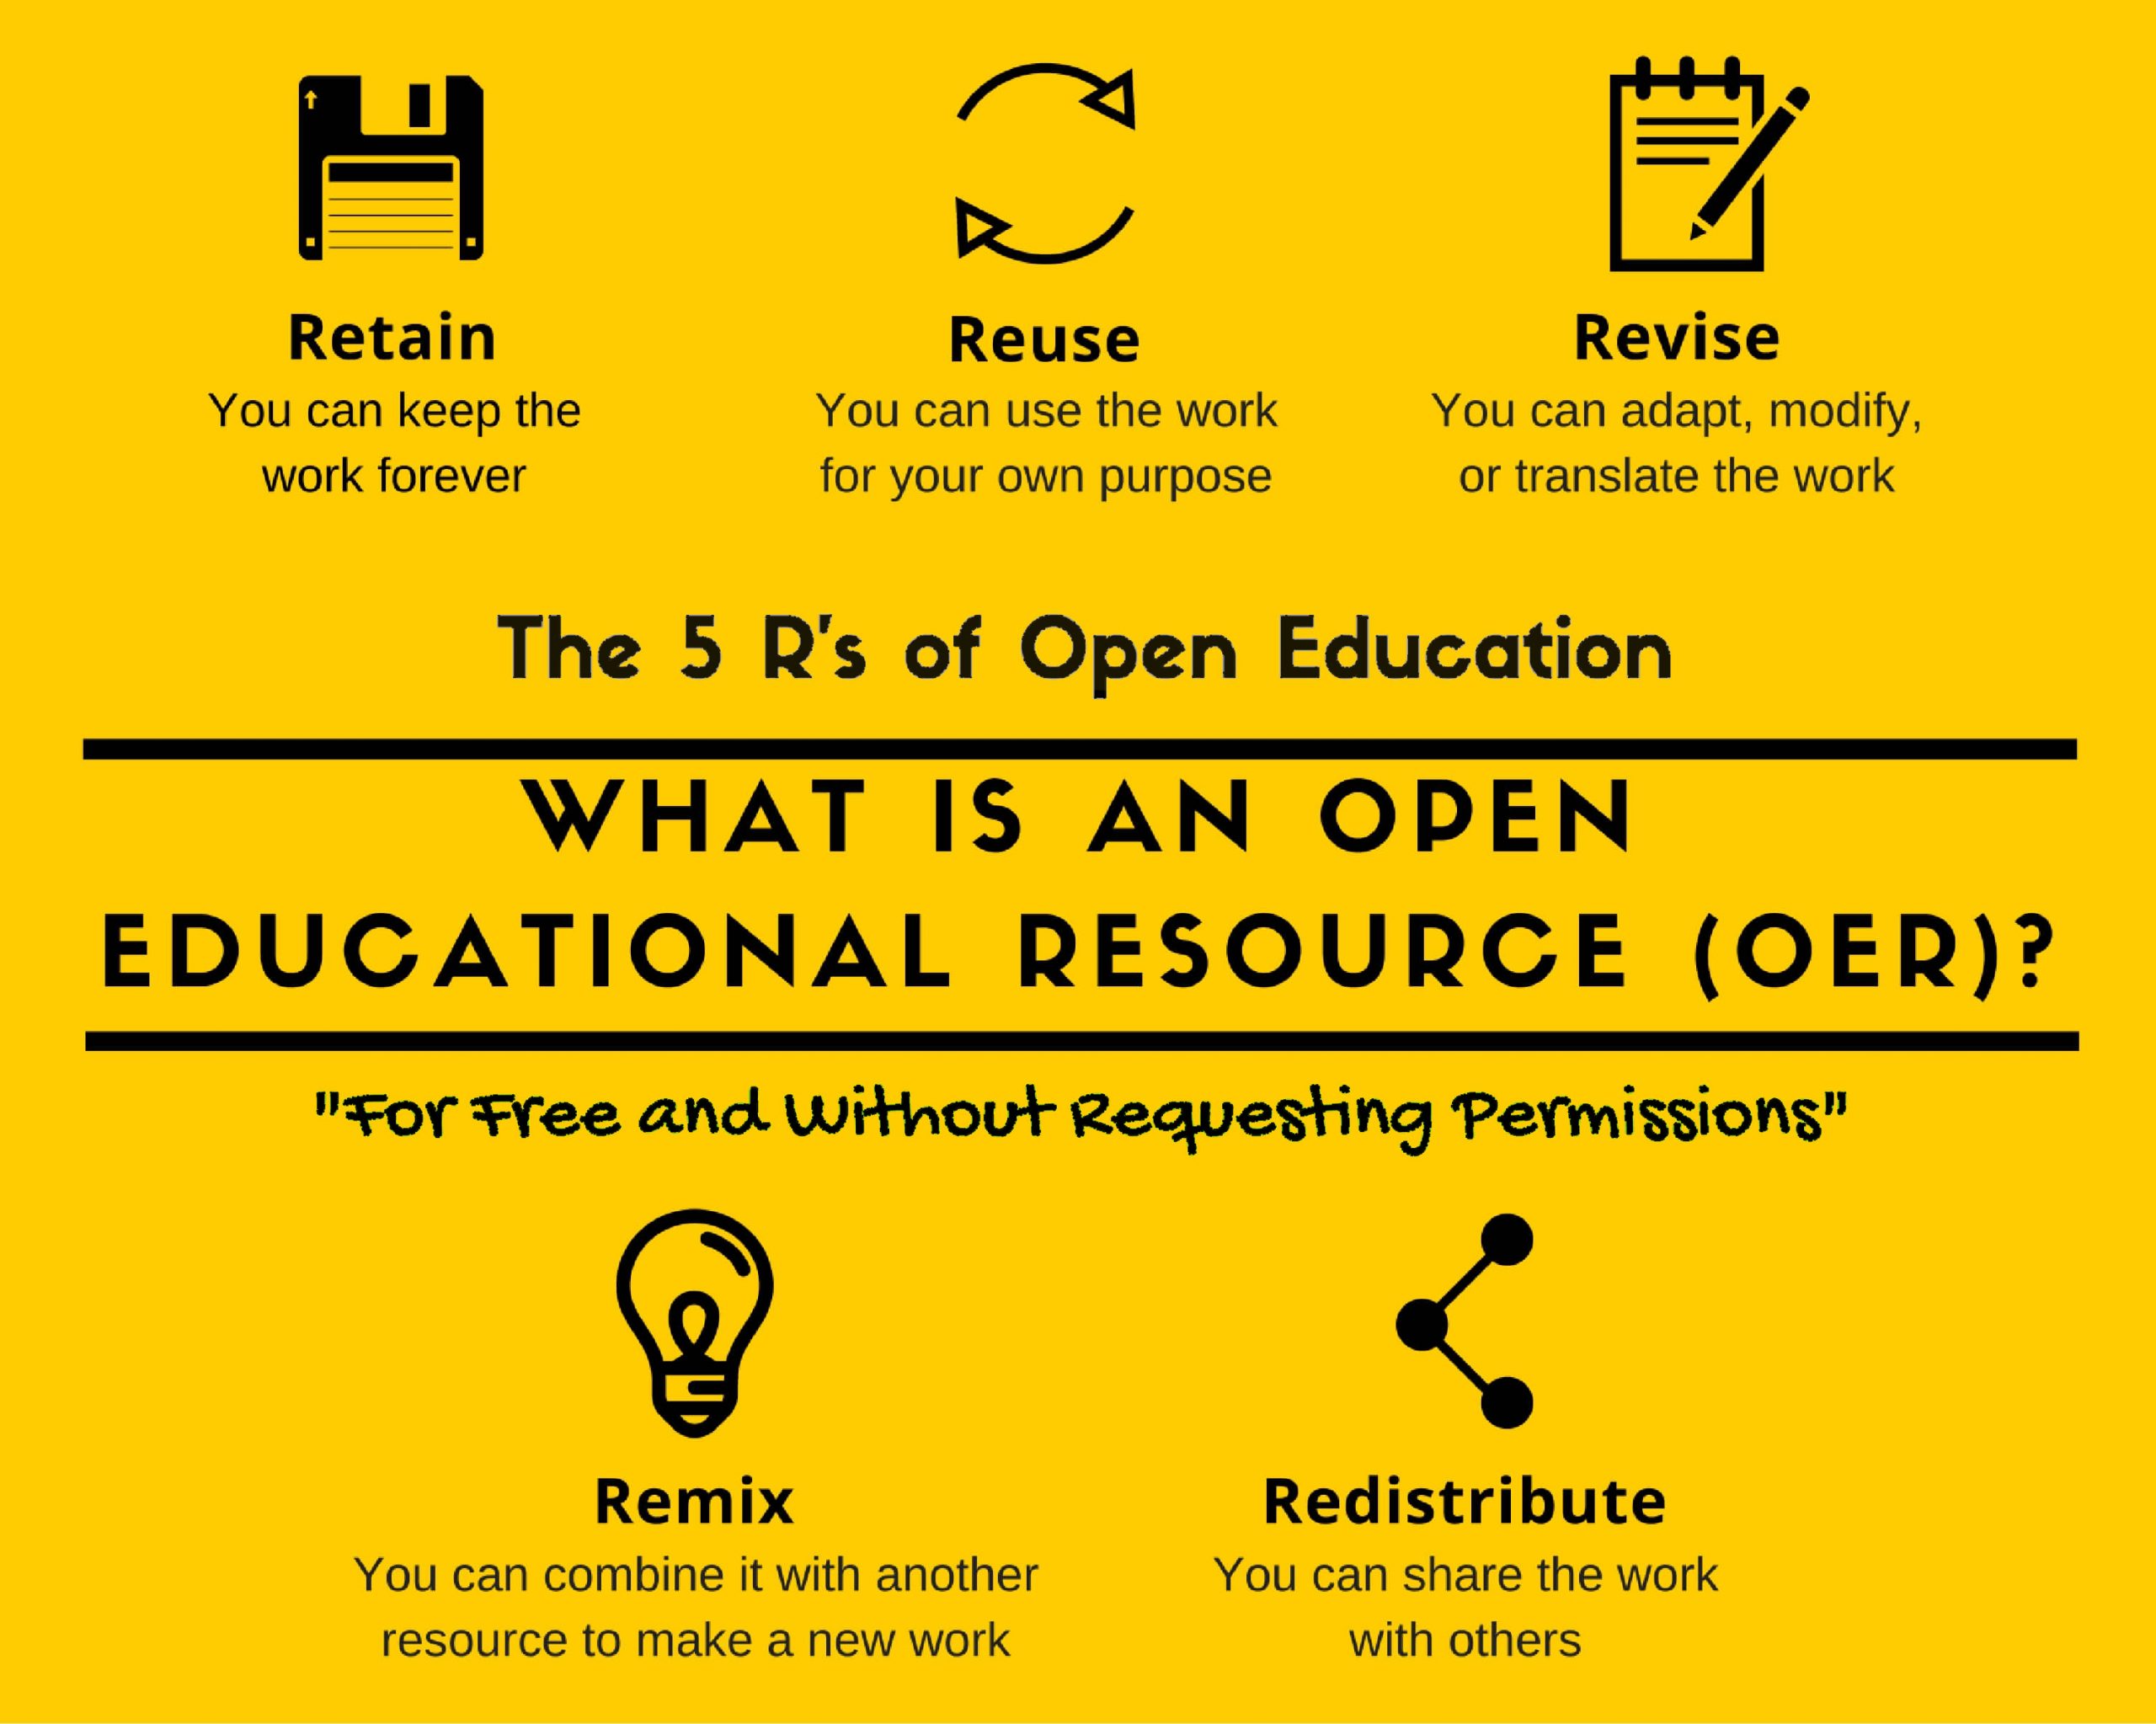 Yellow background with black text asking “what is an open educational resource (OER)?” with 5 icons with descriptions identifying and describing the 5Rs (Retain, Reuse, Revise, Remix, and Redistribute).